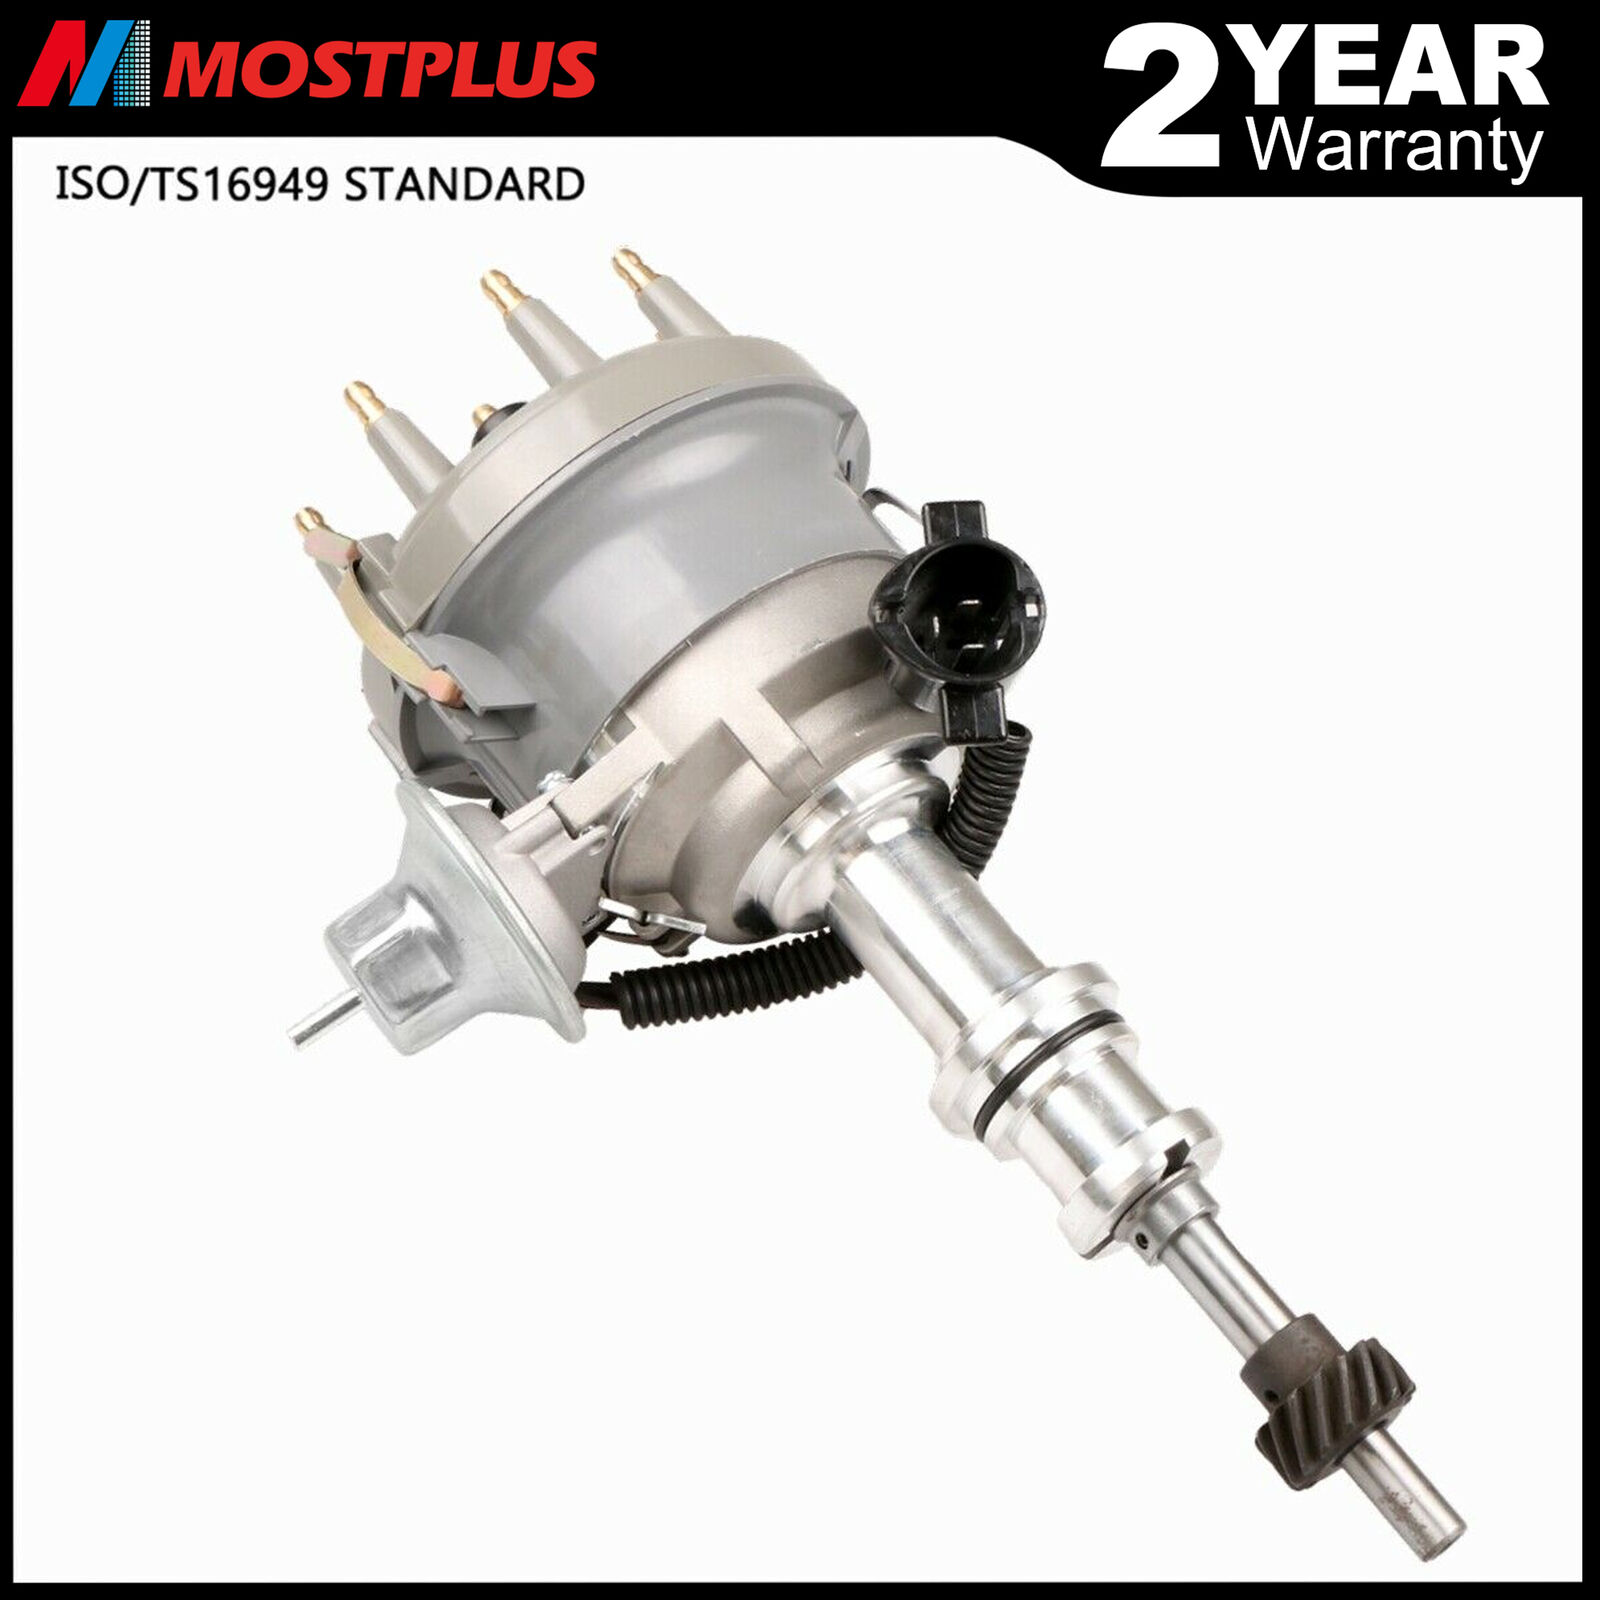 Ignition Distributor For 1977-1985 Ford Mustang Mercury Lincoln 4.2 255 5.0 302